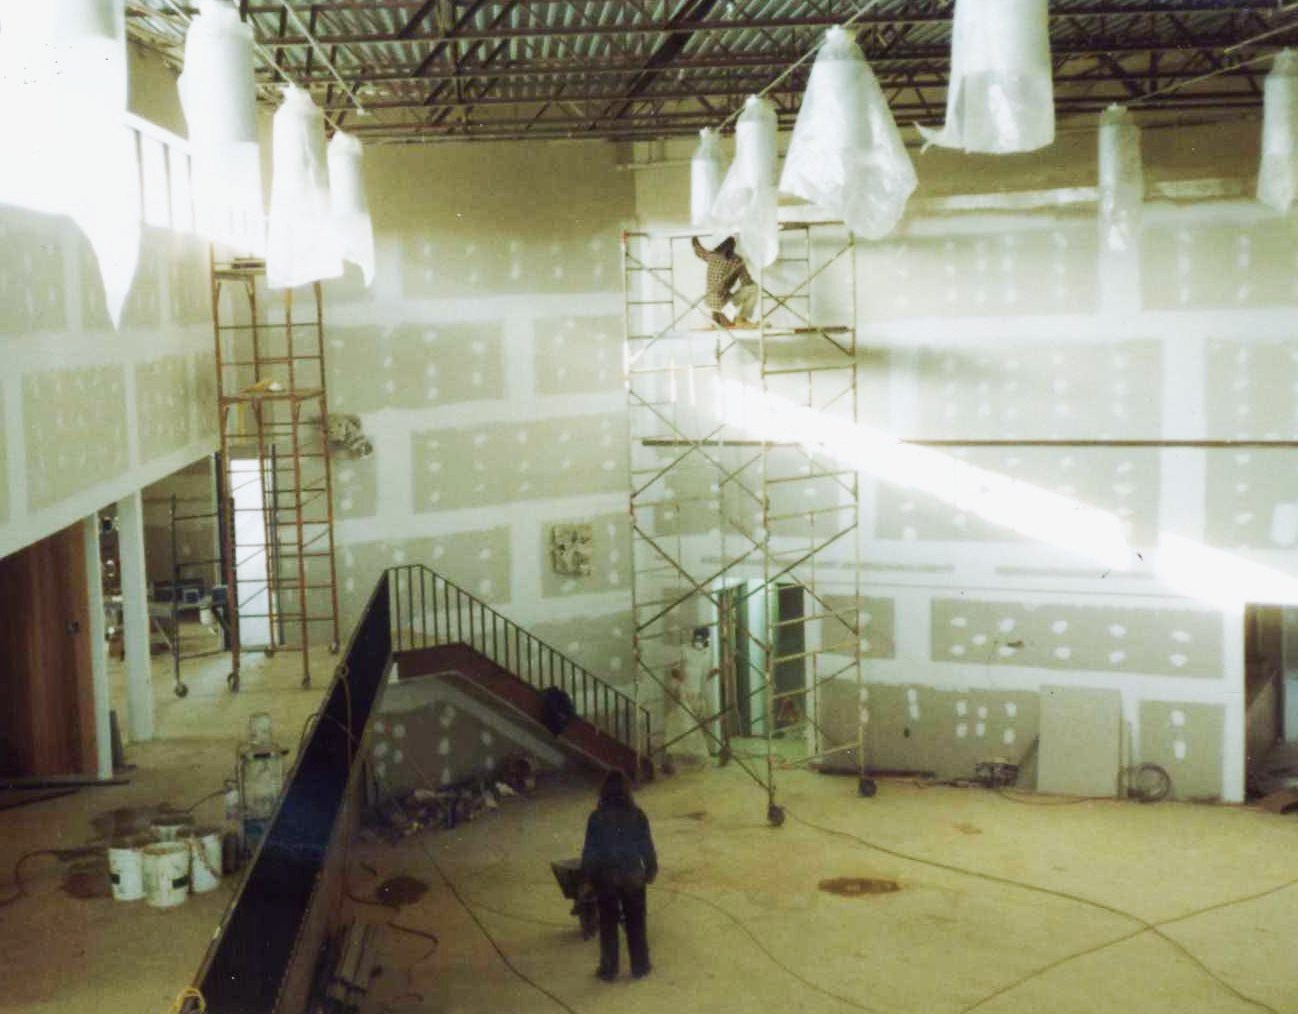 Indoor construction on the new Reston facility, early 1983. Source, NMAM Archives #0001 AMA Collection.